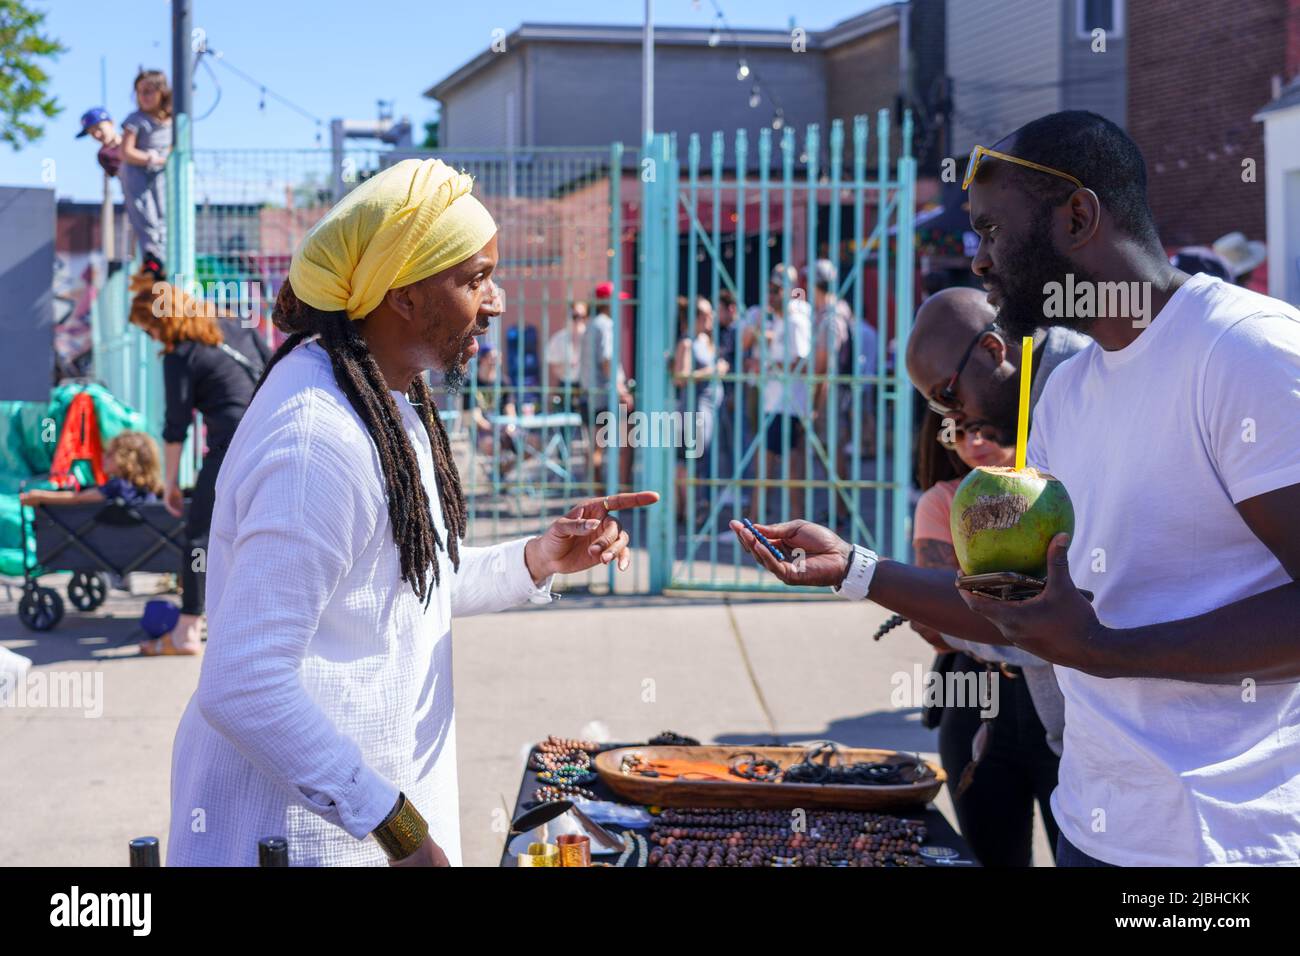 A man of Afro-Caribbean descent is selling souvenirs in a kiosk during the Do West Festival. Stock Photo